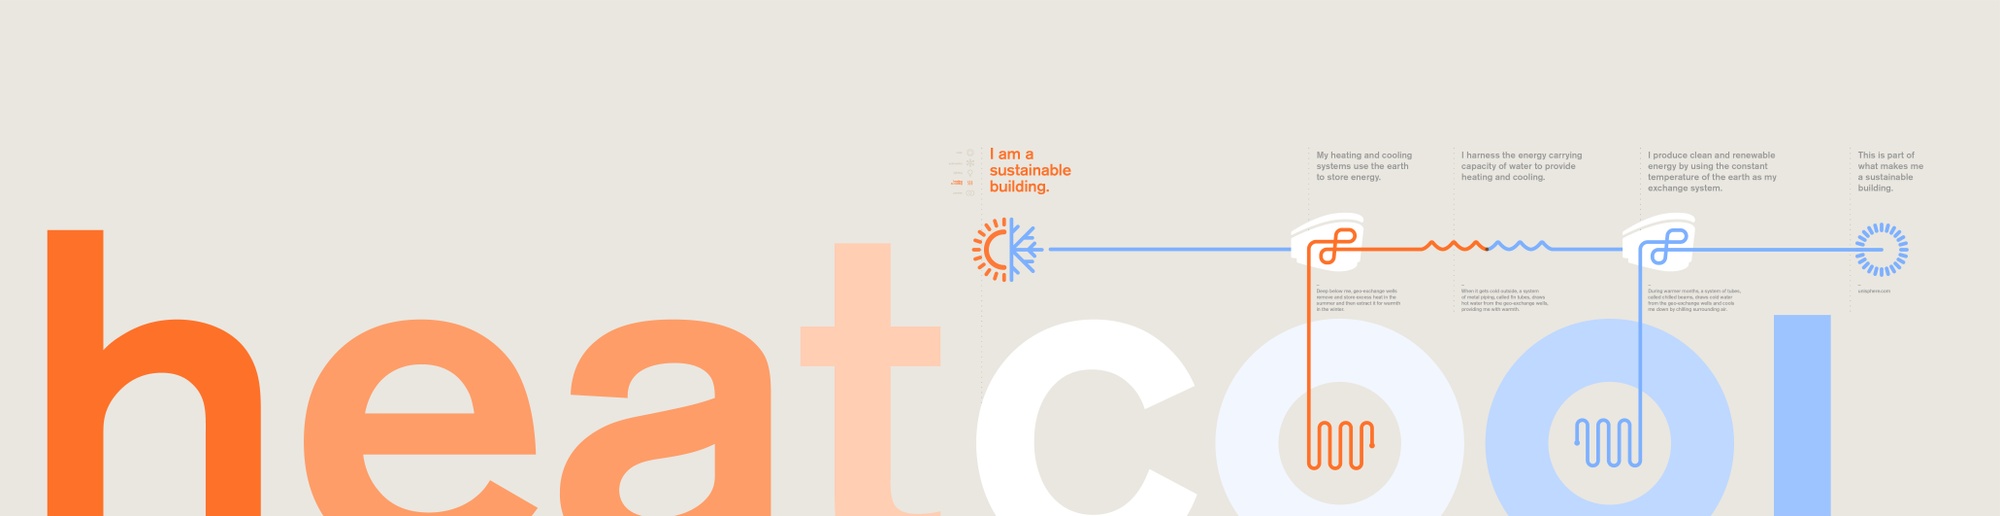 Infographic that says "heatcool" in orange to blue gradient text